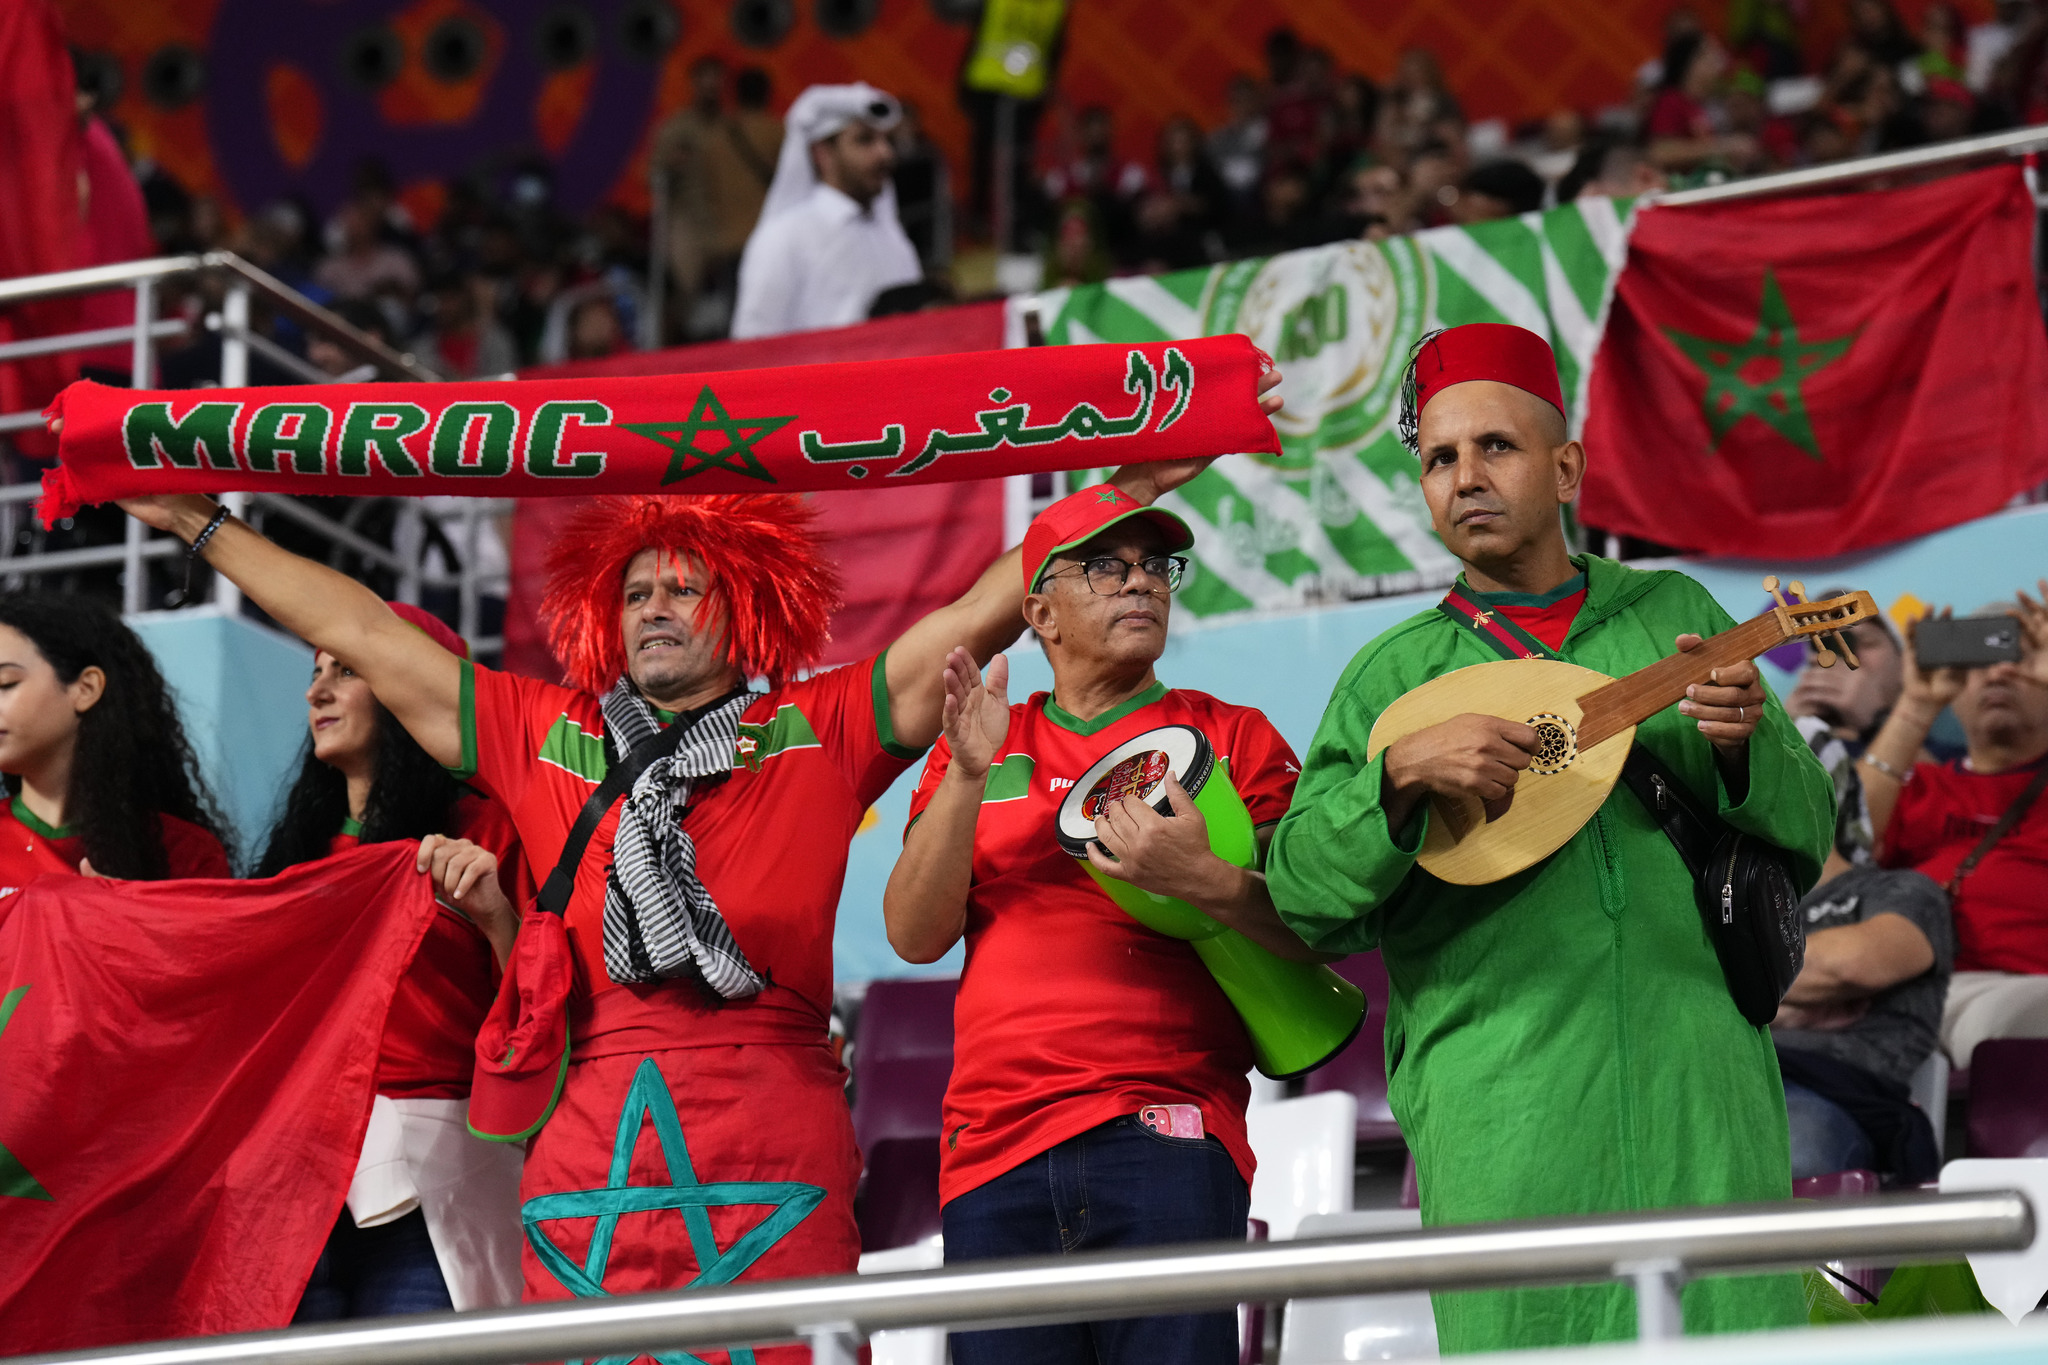  lt;HIT gt;Fans lt;/HIT gt; of  lt;HIT gt;Morocco lt;/HIT gt; cheer prior to the World Cup third-place playoff soccer match between Croatia and  lt;HIT gt;Morocco lt;/HIT gt; at Khalifa International Stadium in Doha, Qatar, Saturday, Dec. 17, 2022. (AP Photo/Hassan Ammar)